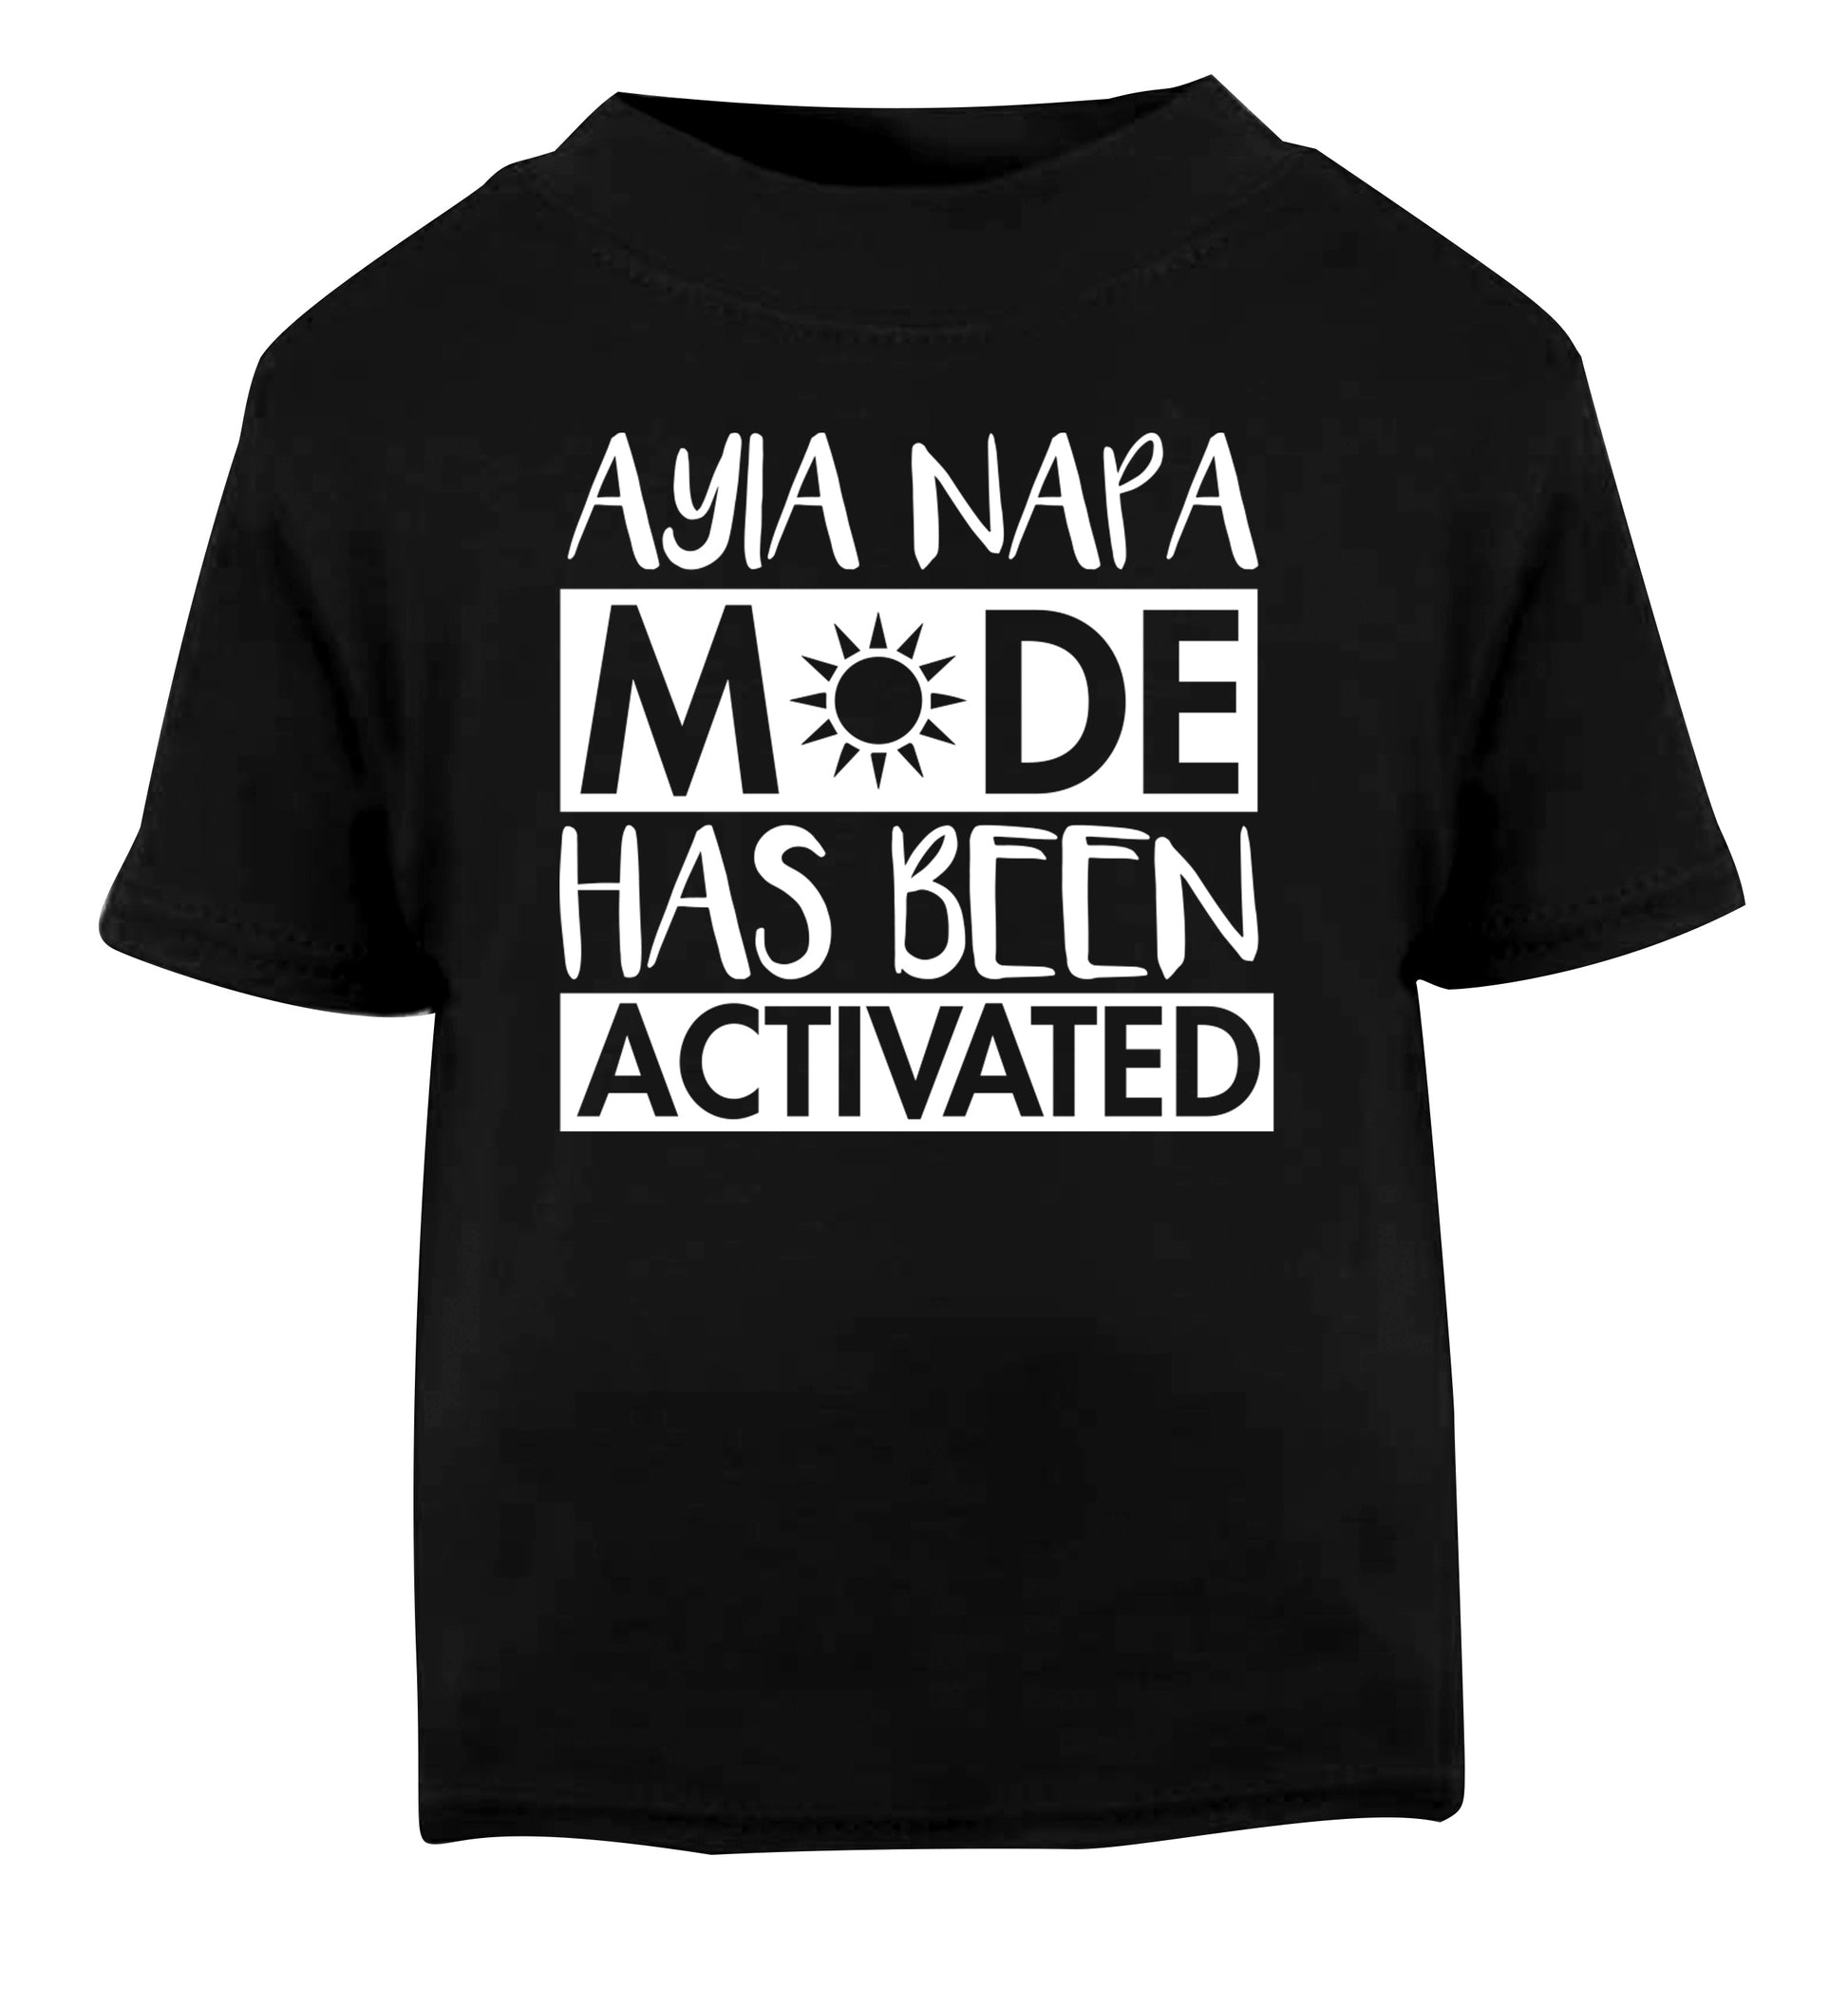 Ayia Napa mode has been activated Black Baby Toddler Tshirt 2 years